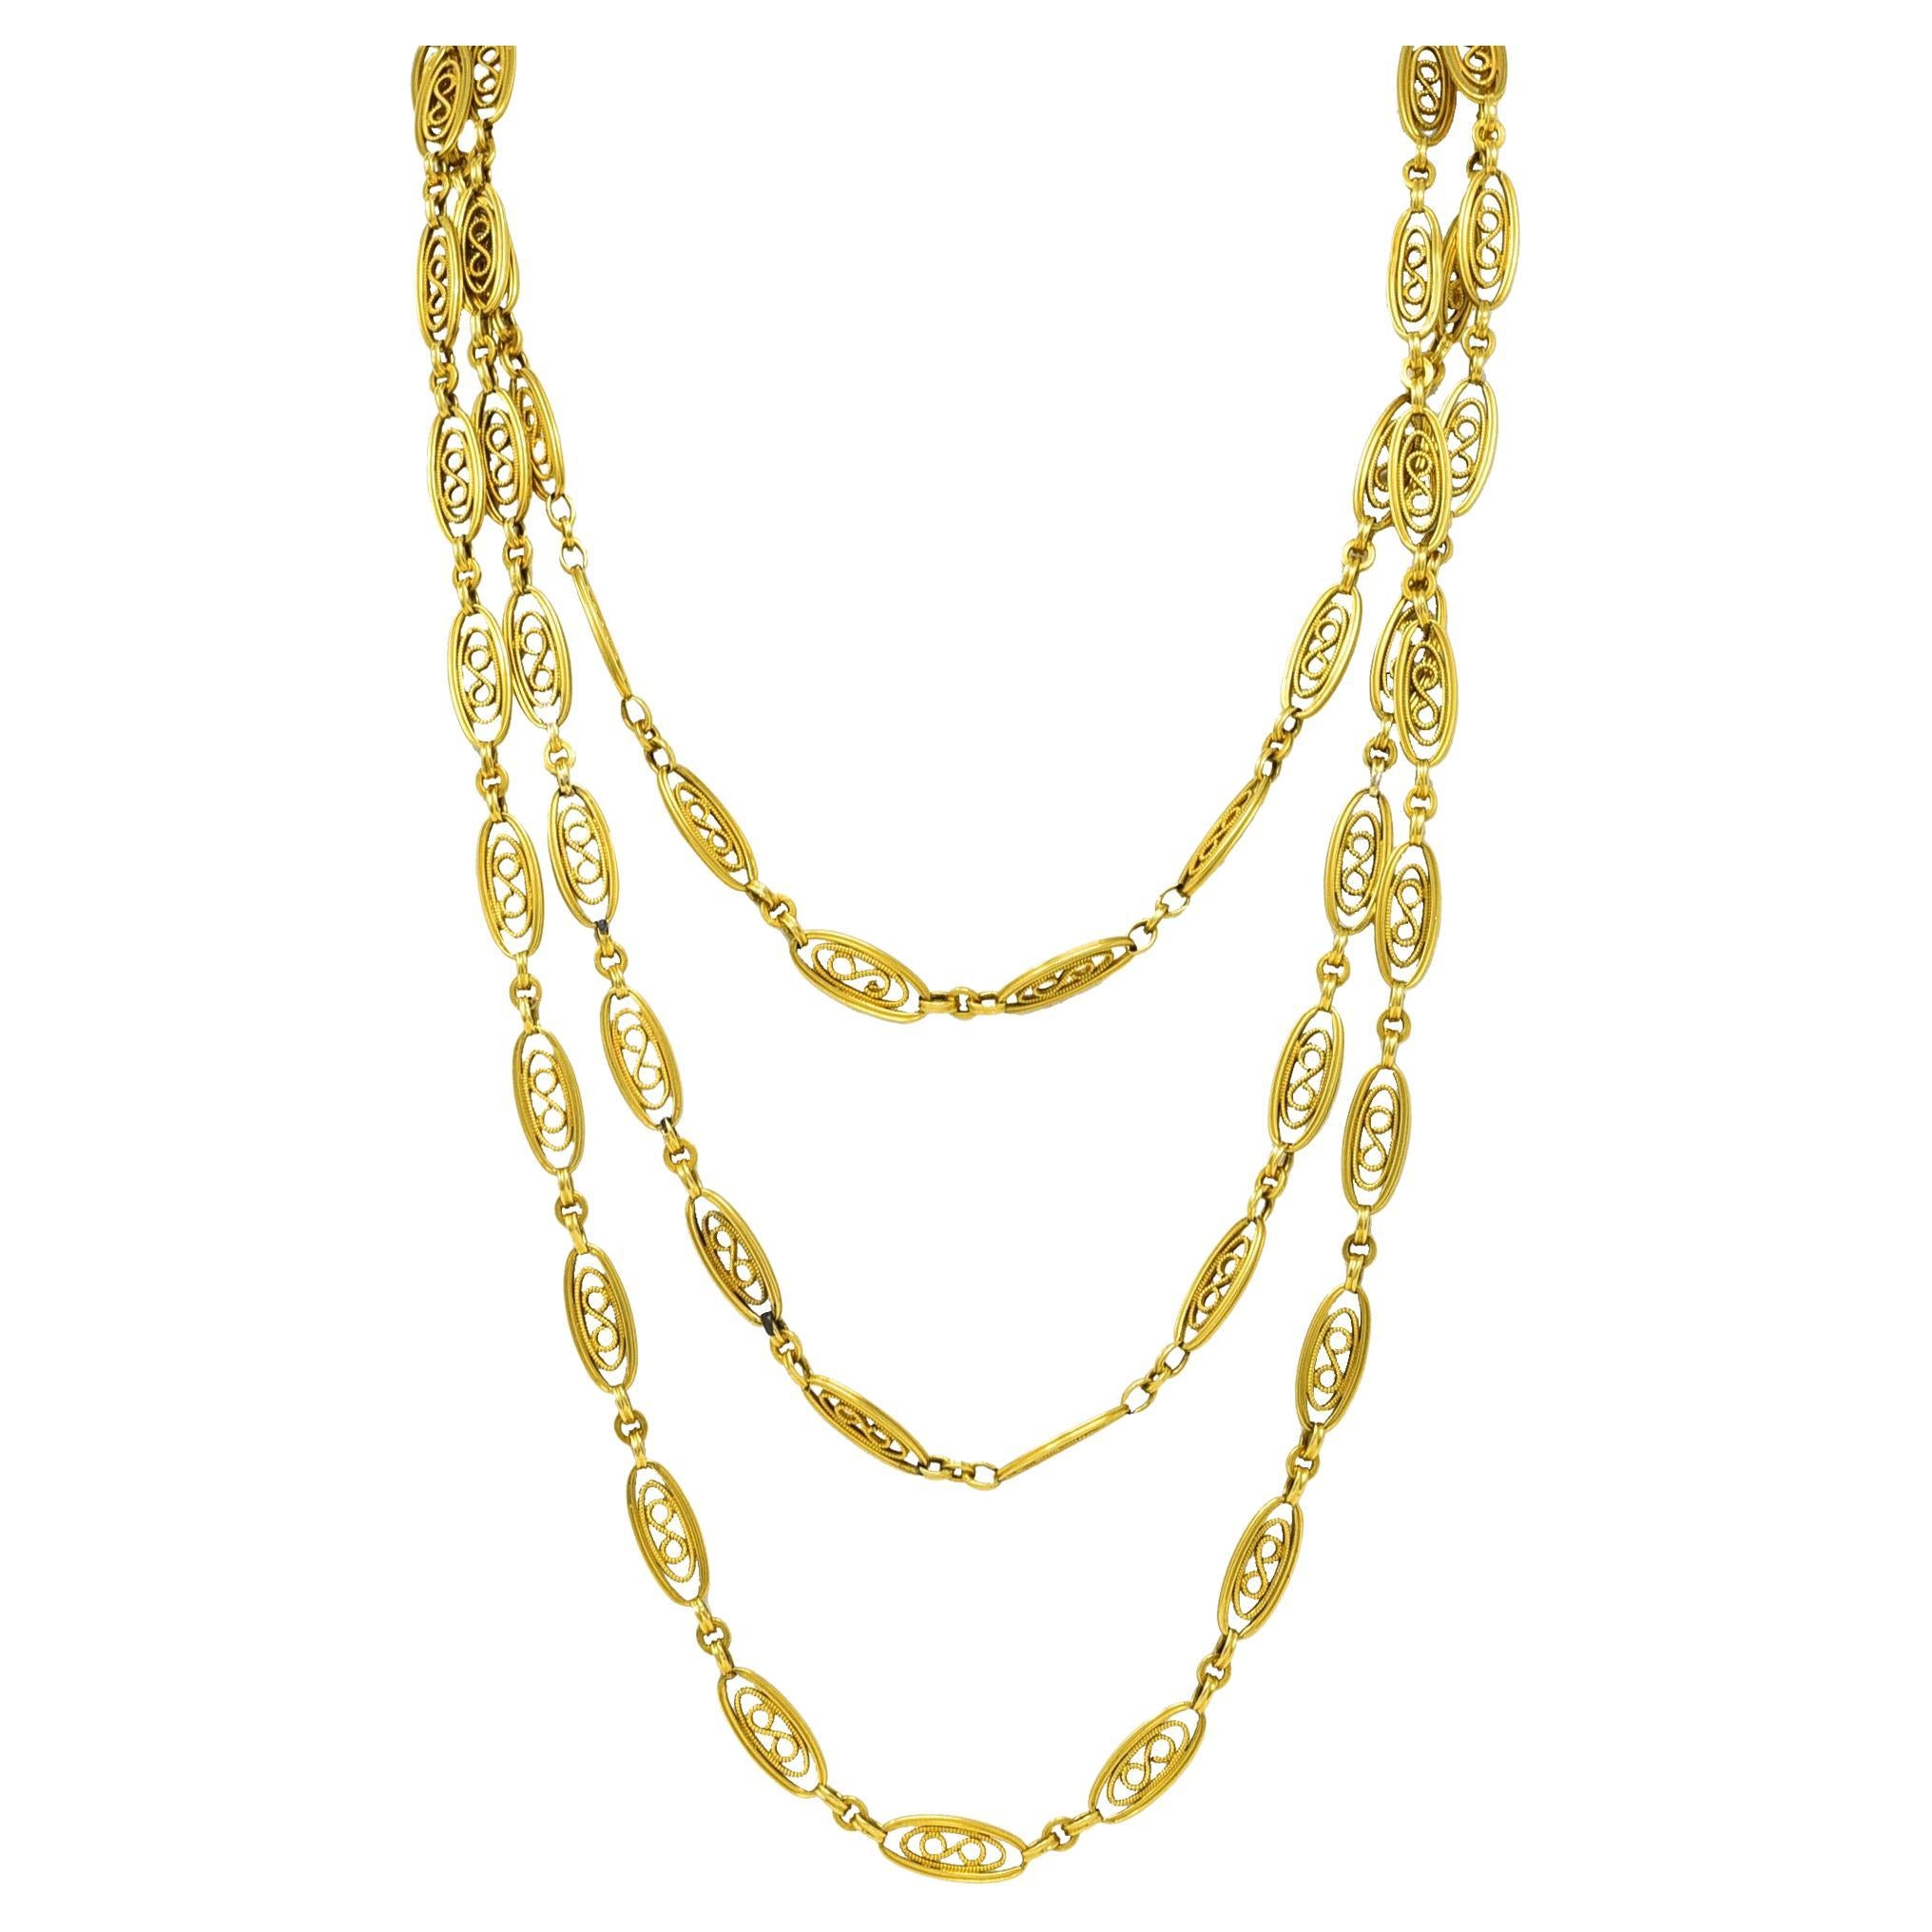 French Victorian 18 Karat Yellow Gold 65 Inch Long Chain Antique Lariat Necklace